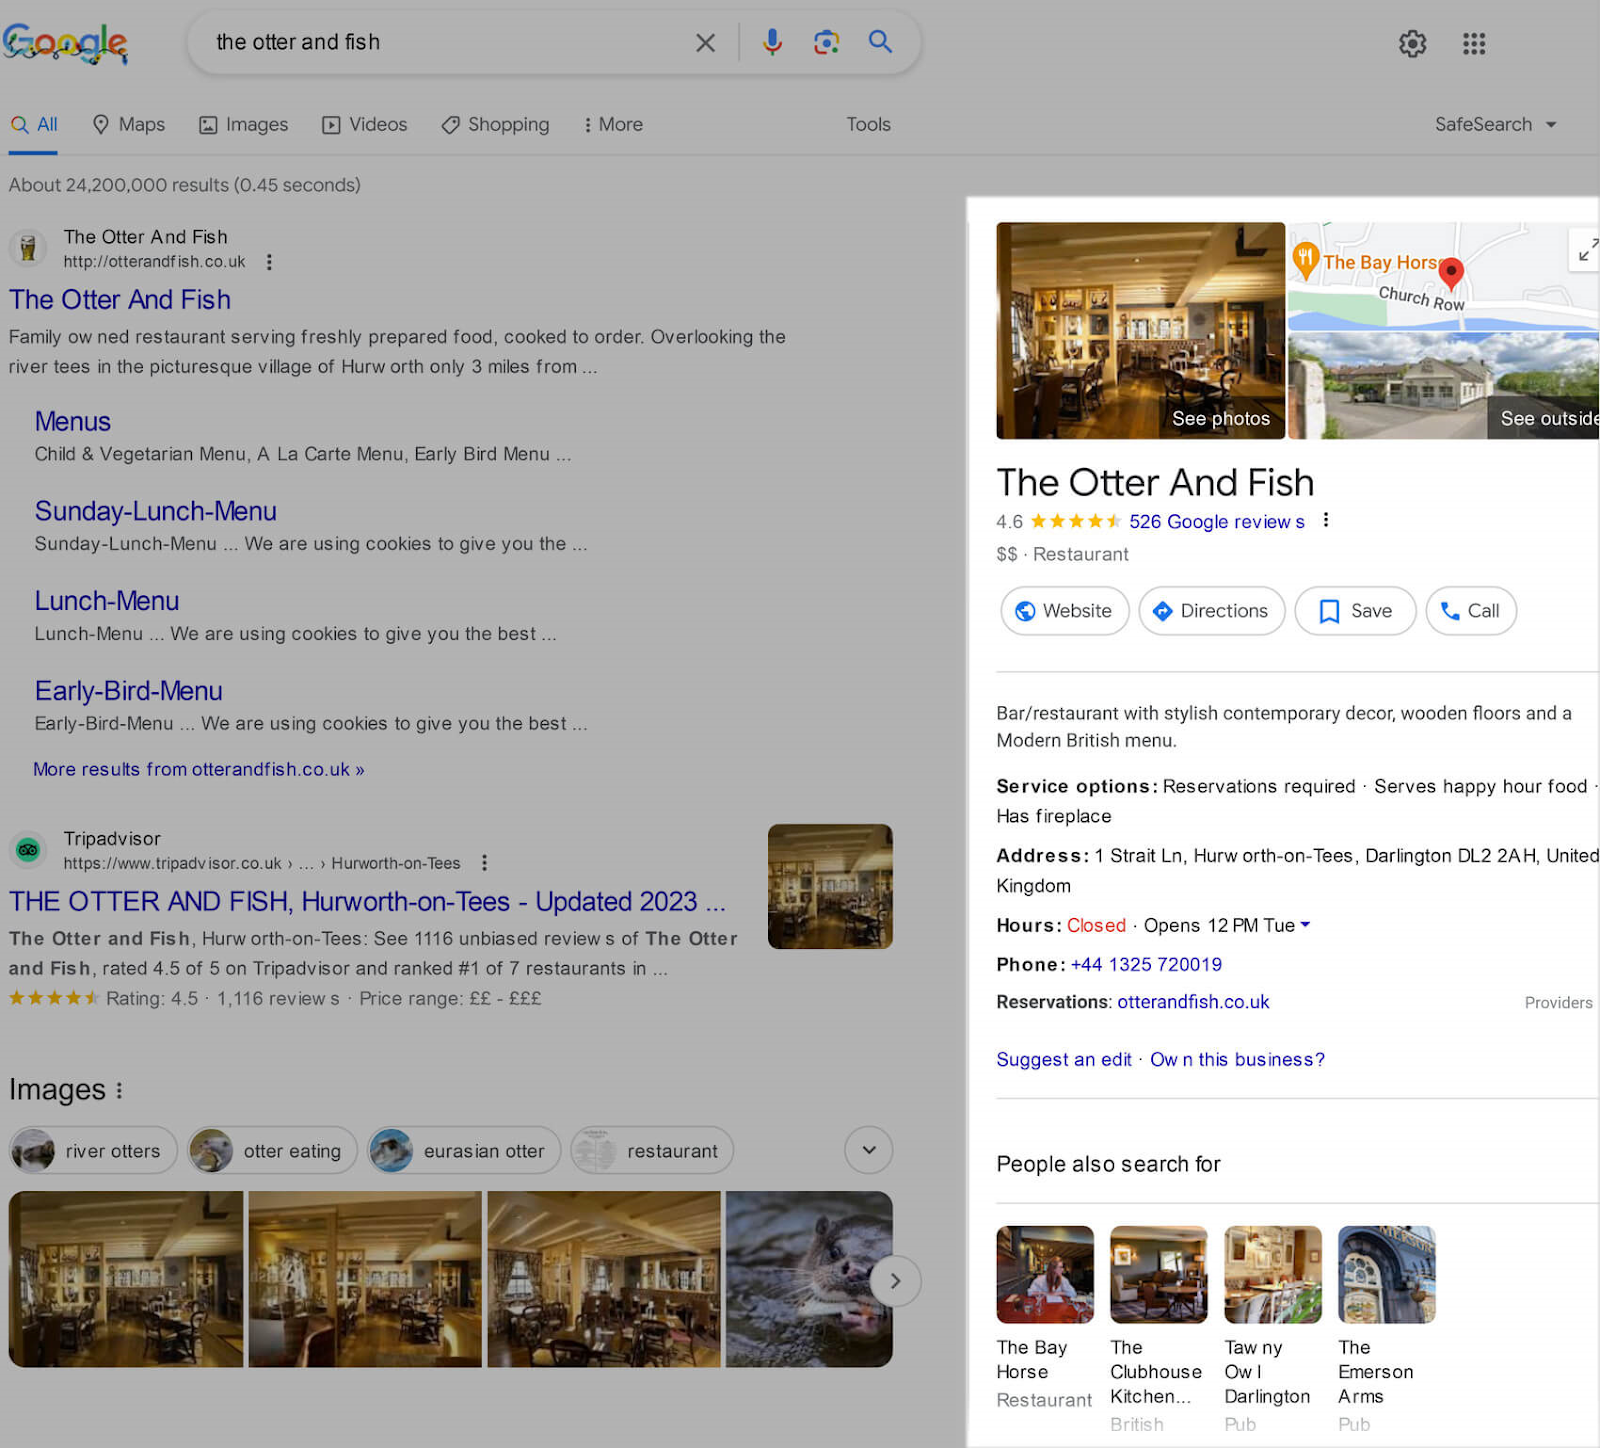 Google Business Profile for "The Otter And Fish" appears in the right sidebar on desktop SERP